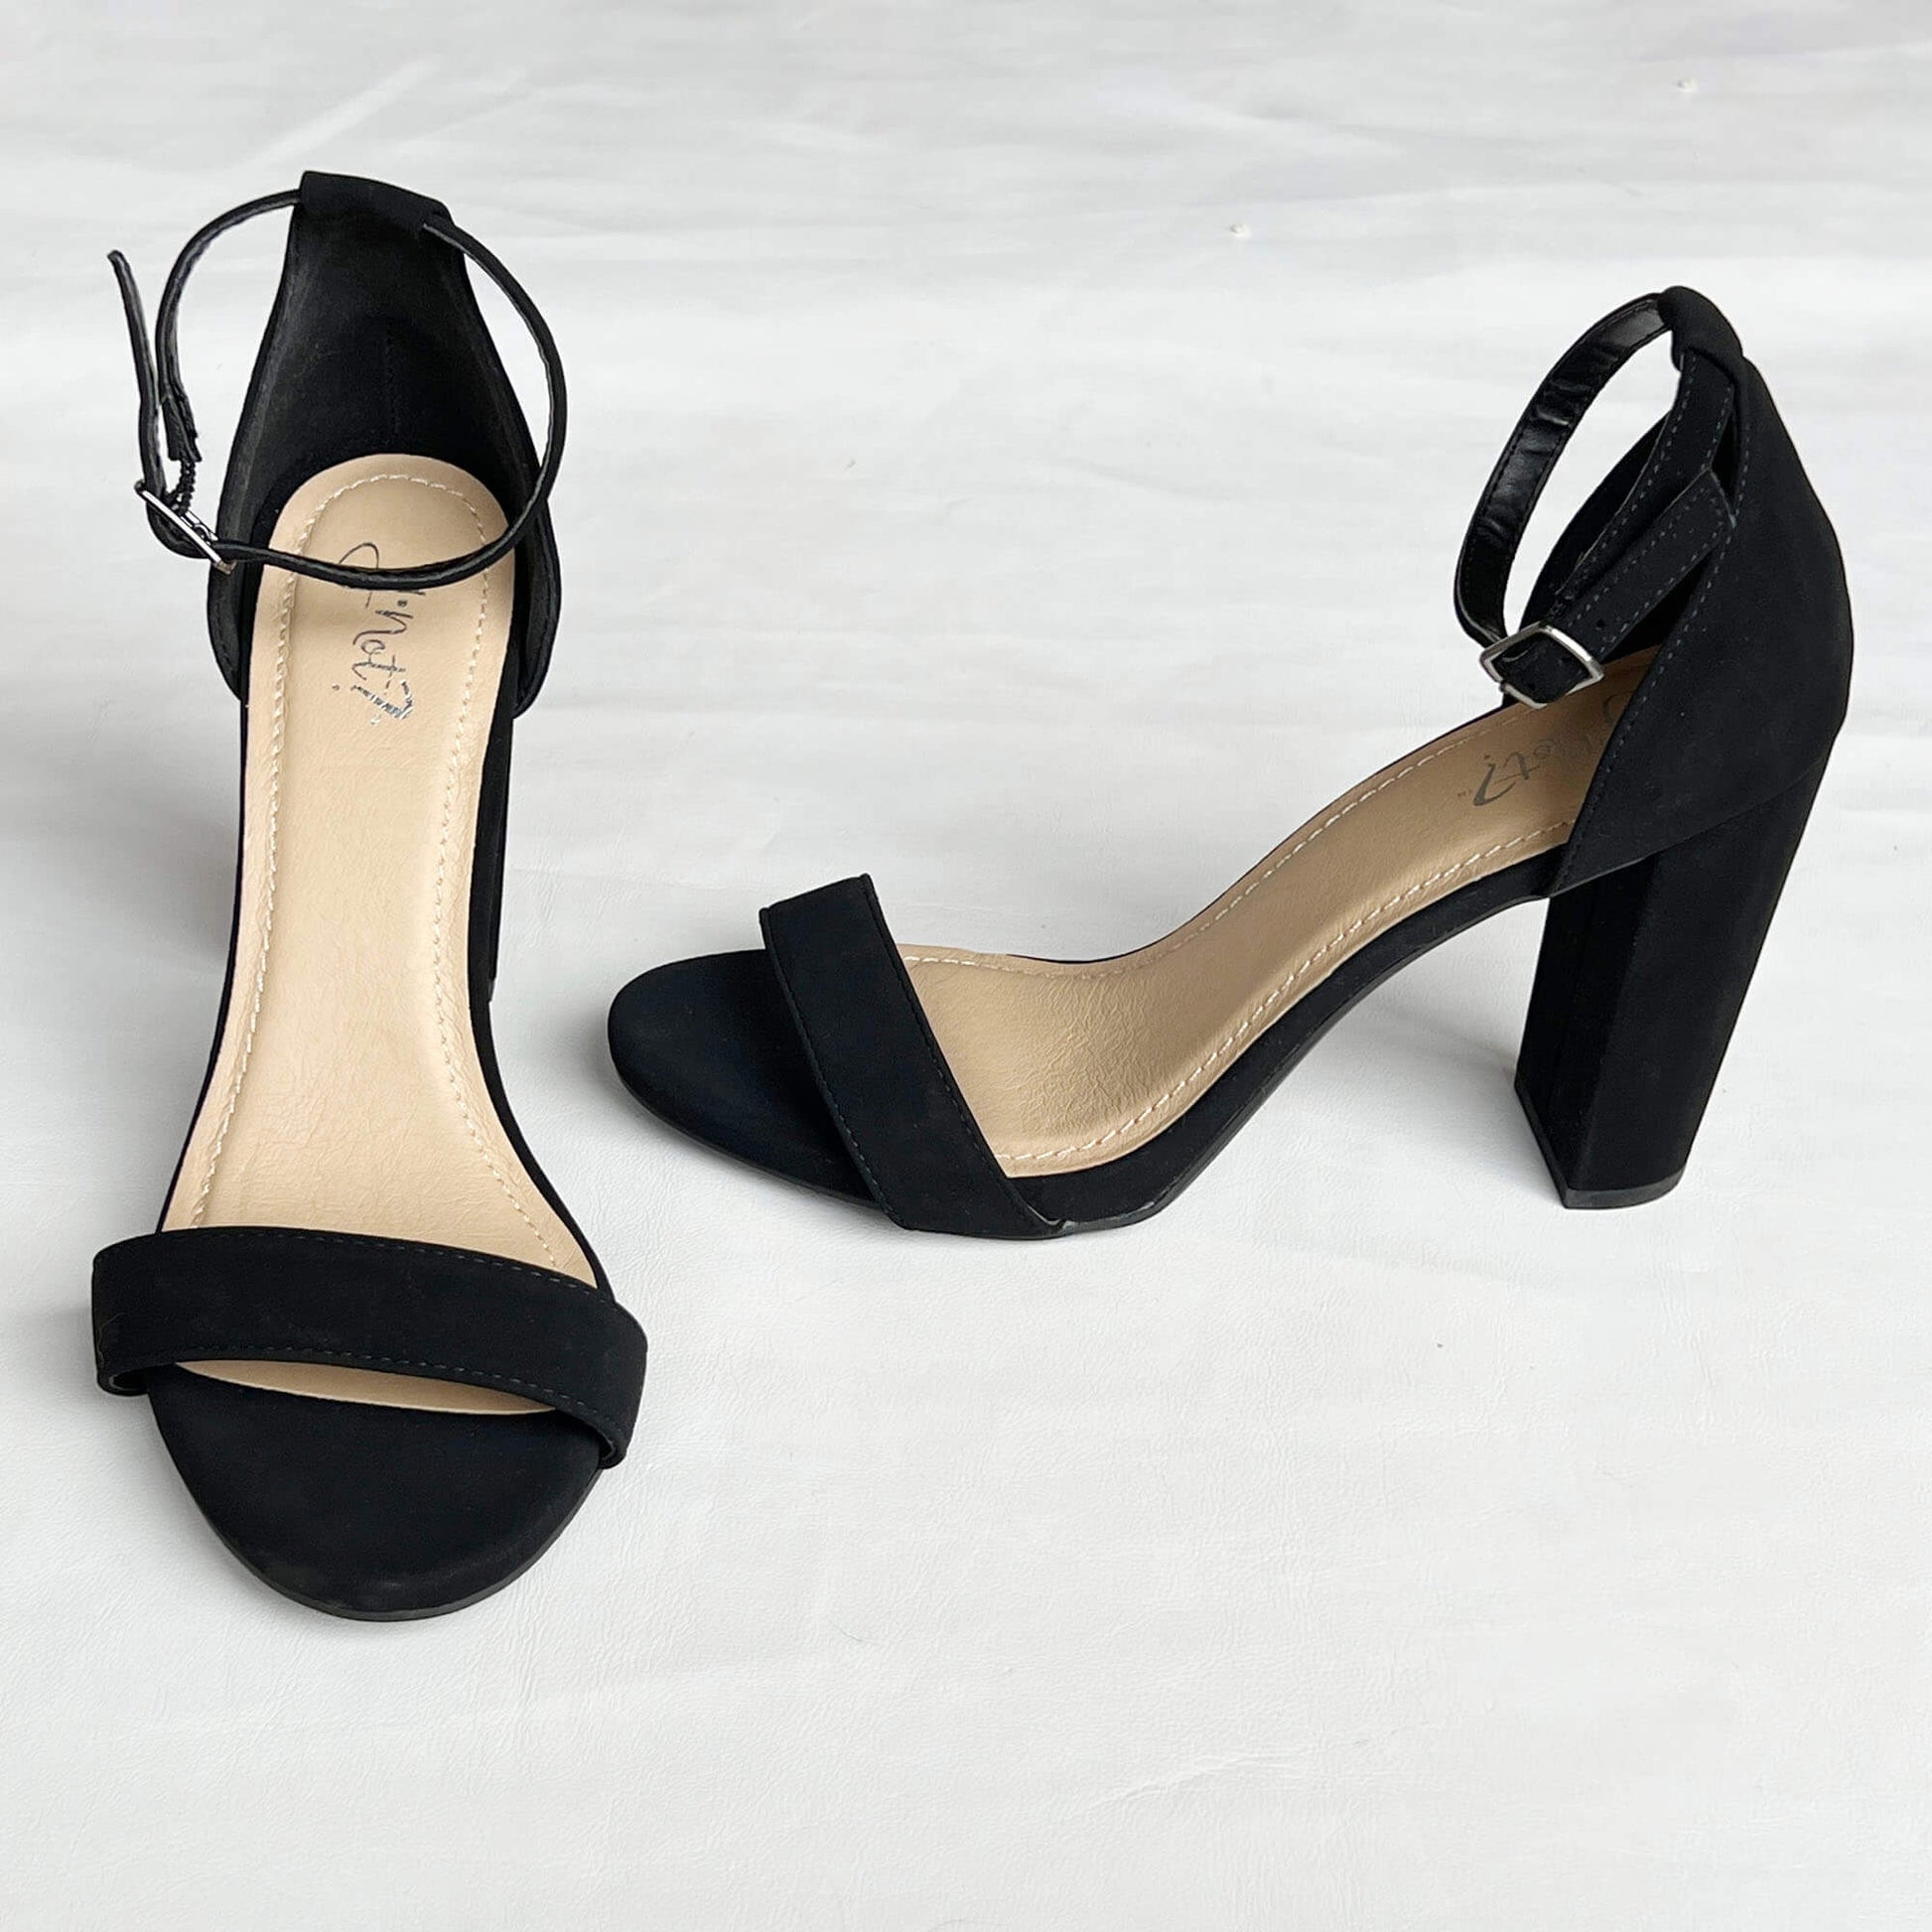 Y-Not-Women_s-Black-Suede-Ankle-Stray-Sandals.-Front-and-Side-View.-8M.-Shop-eBargainsAndDeals.com